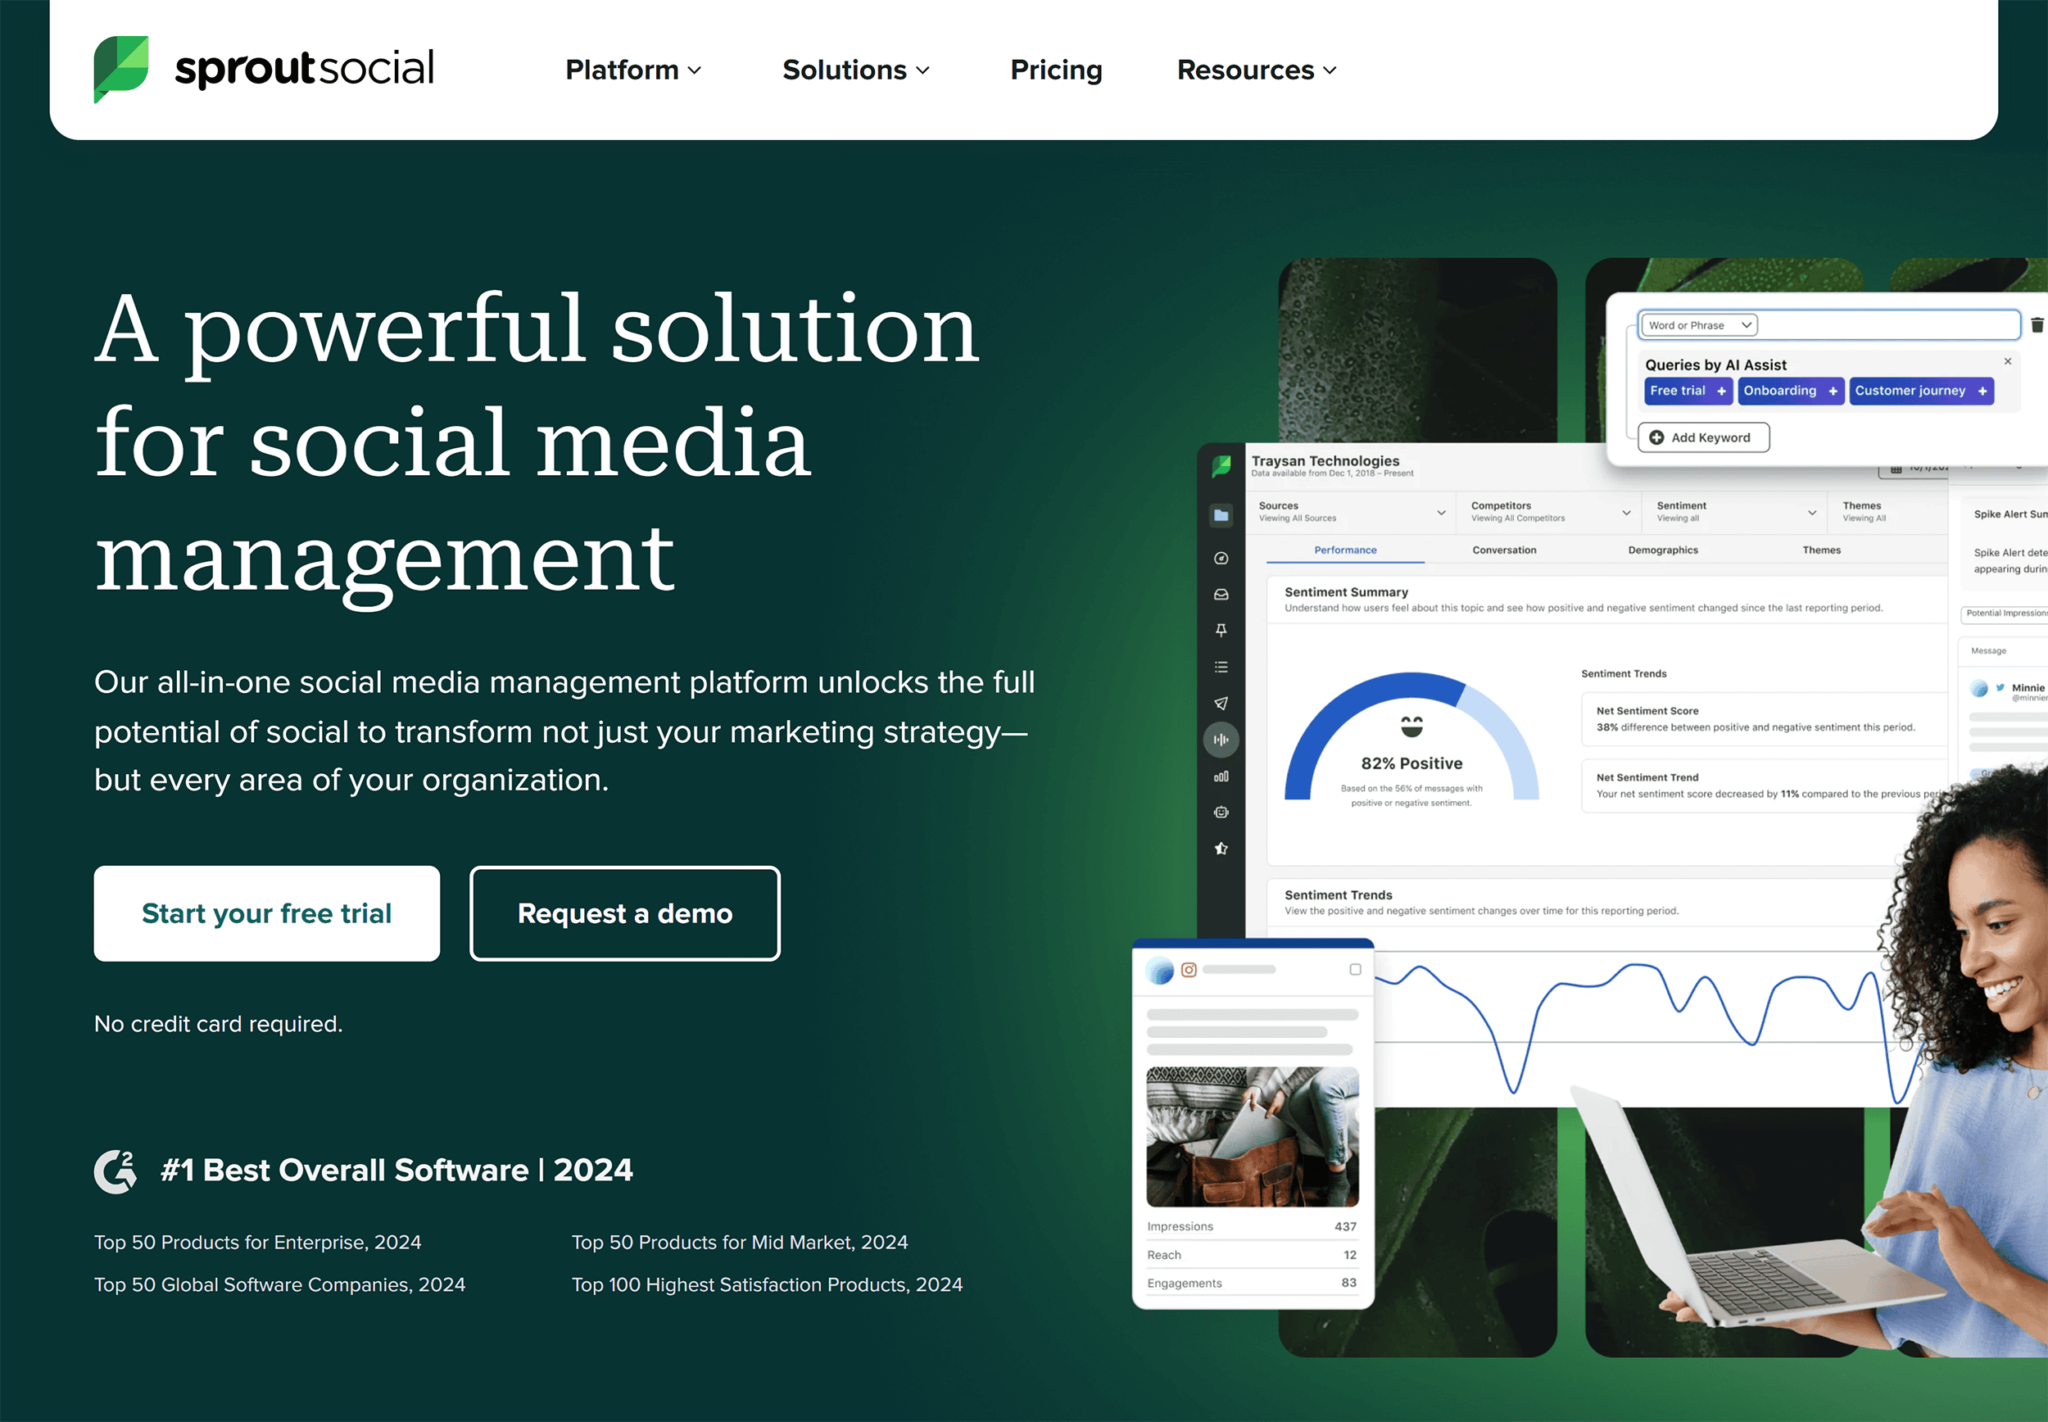 sproutsocial-homepage 29 Top Digital Marketing Tools for Every Budget